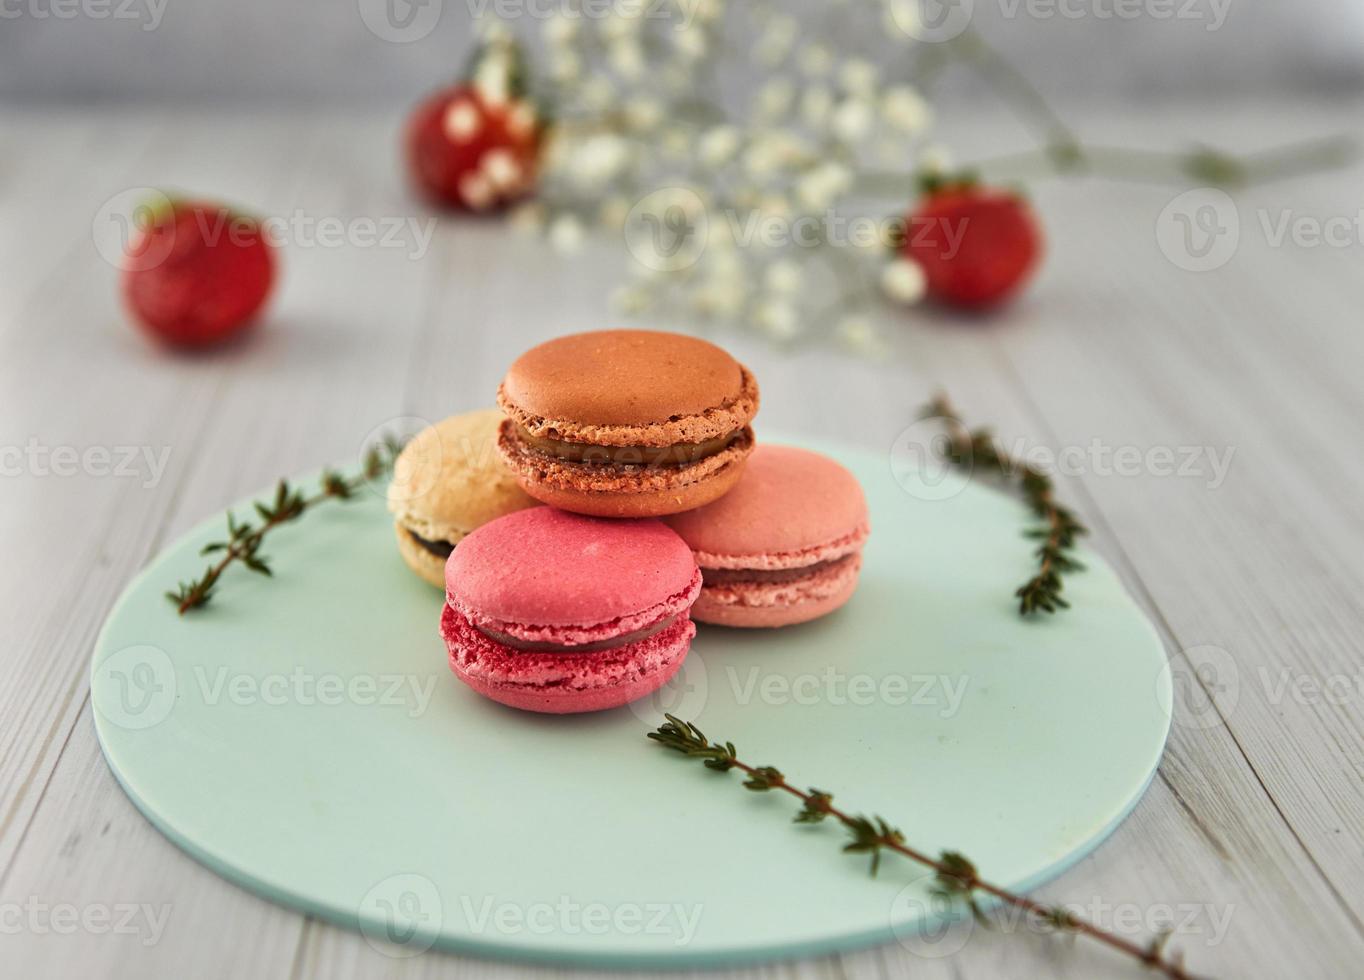 French colorful macaroons. Colorful pastel macaroons on a light background with fresh strawberries. Concept soft focus. photo